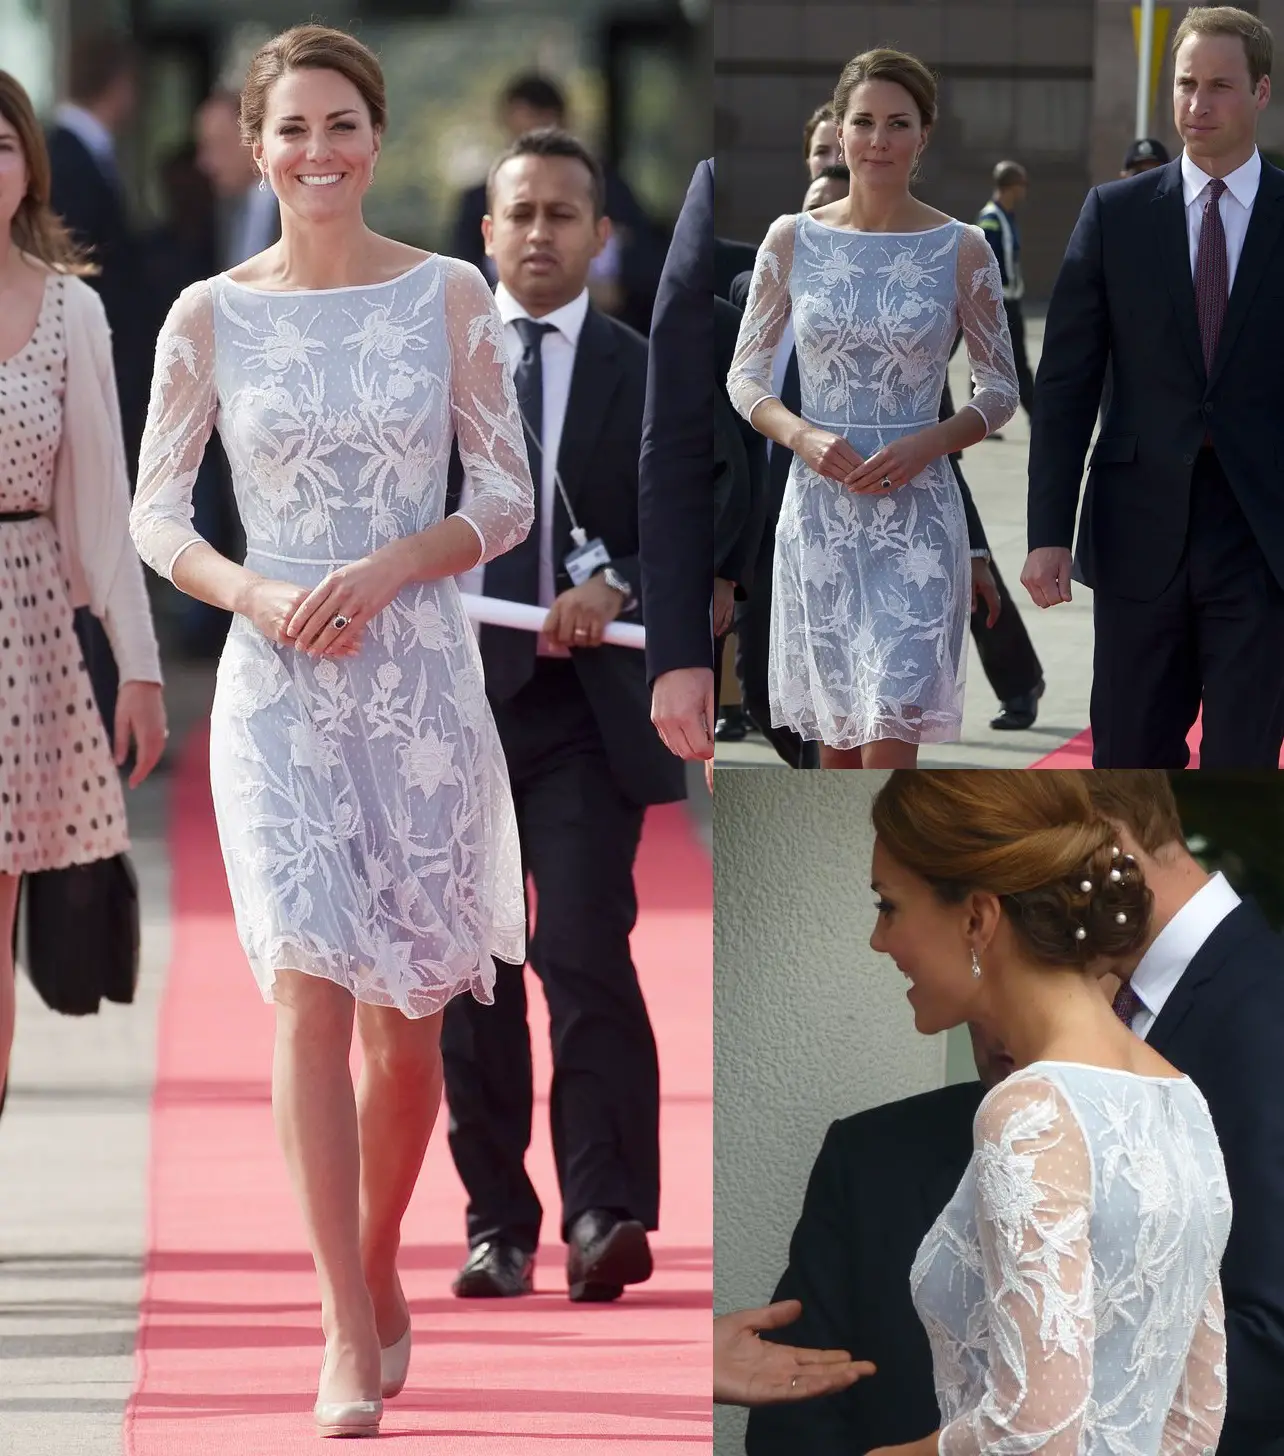 Duchess of Cambridge wore Alice Temperley lace dress in Malaysia during Diamond Jubilee tour in 2012